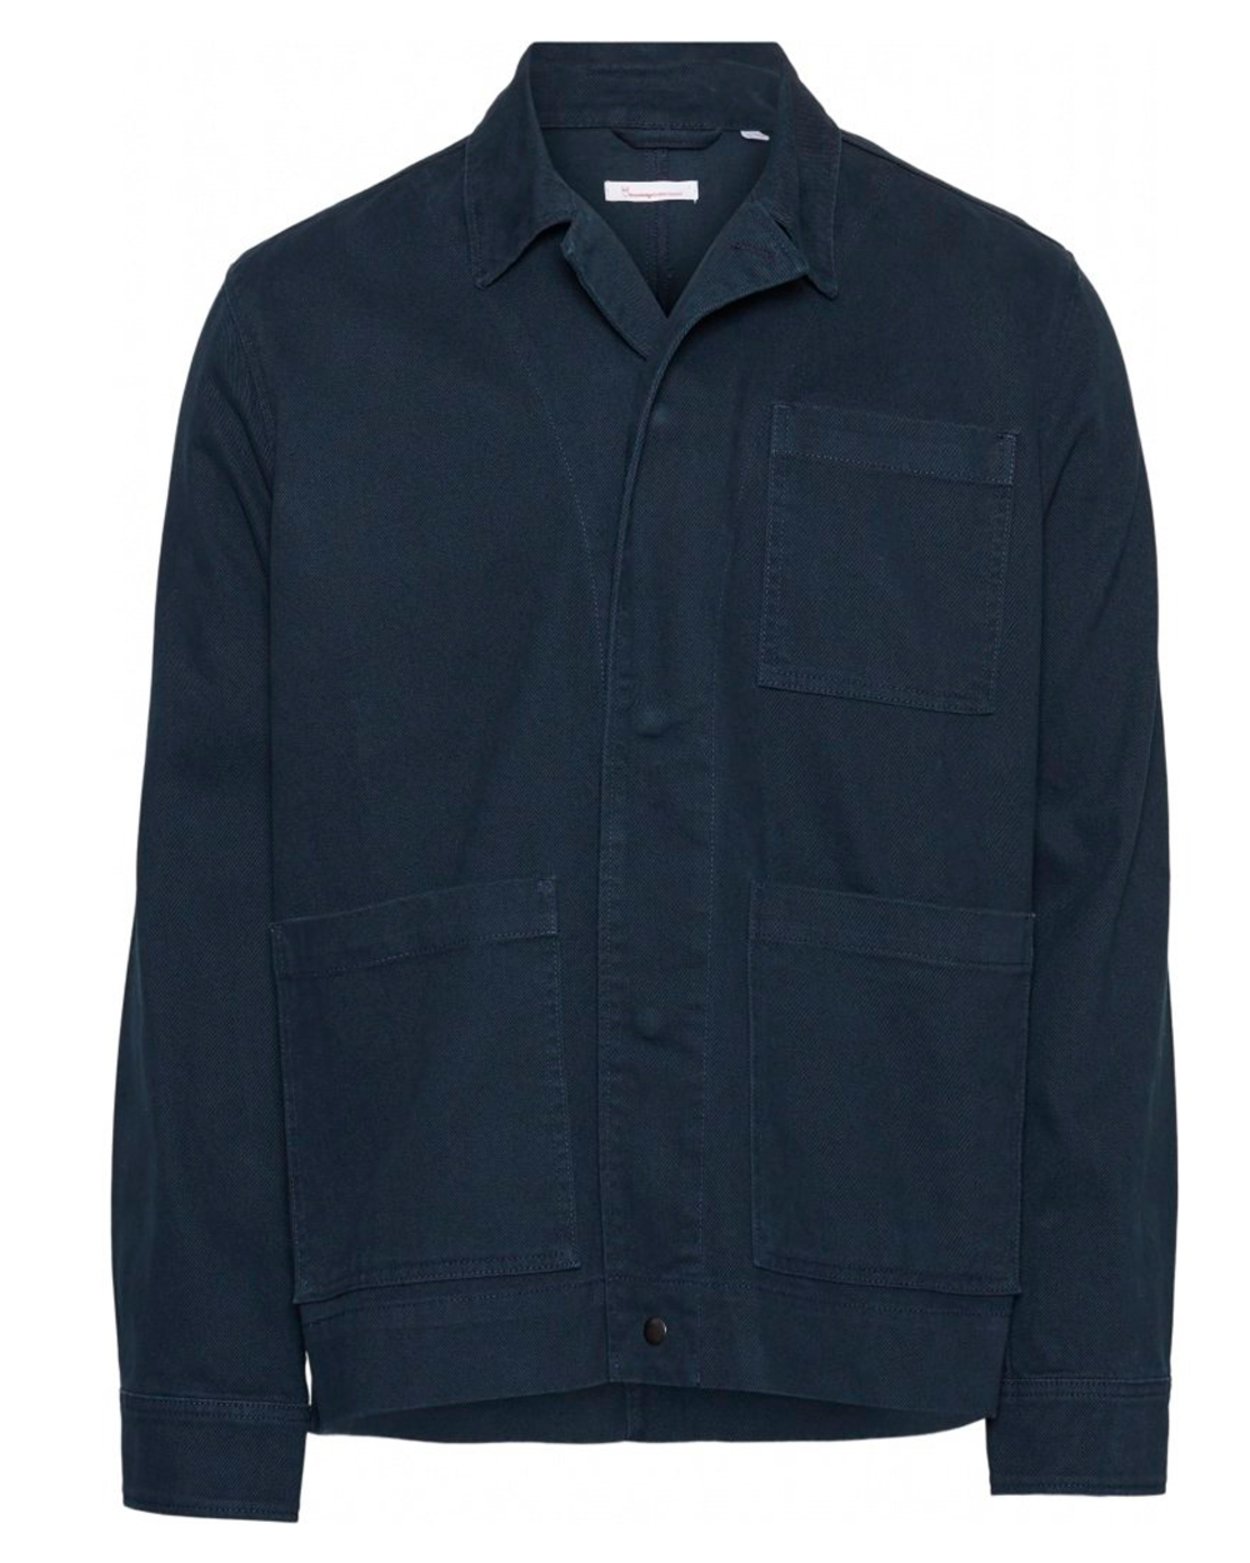 Pine Heavy Twill Overshirt | Clothing by Knowledge Cotton Apparel ...